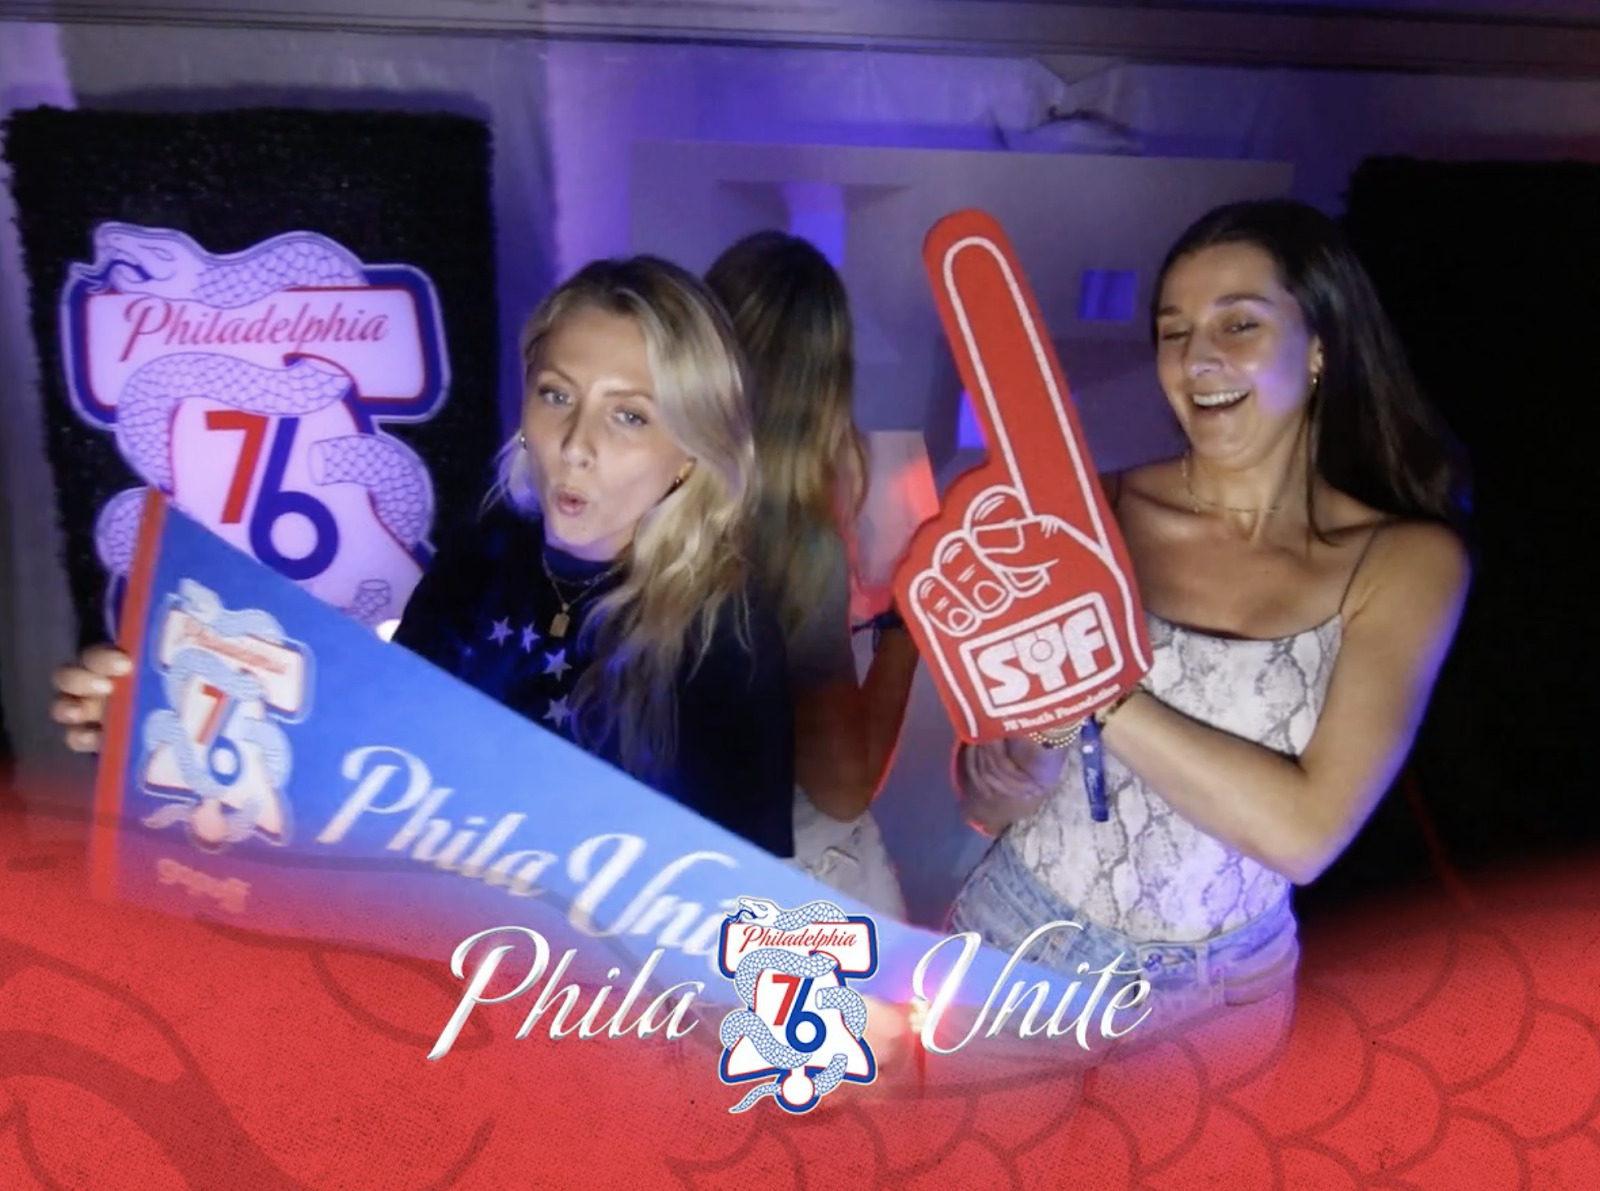 Two girls celebrating. One is holding a Philadelphia 76er flag and the other a foam finger